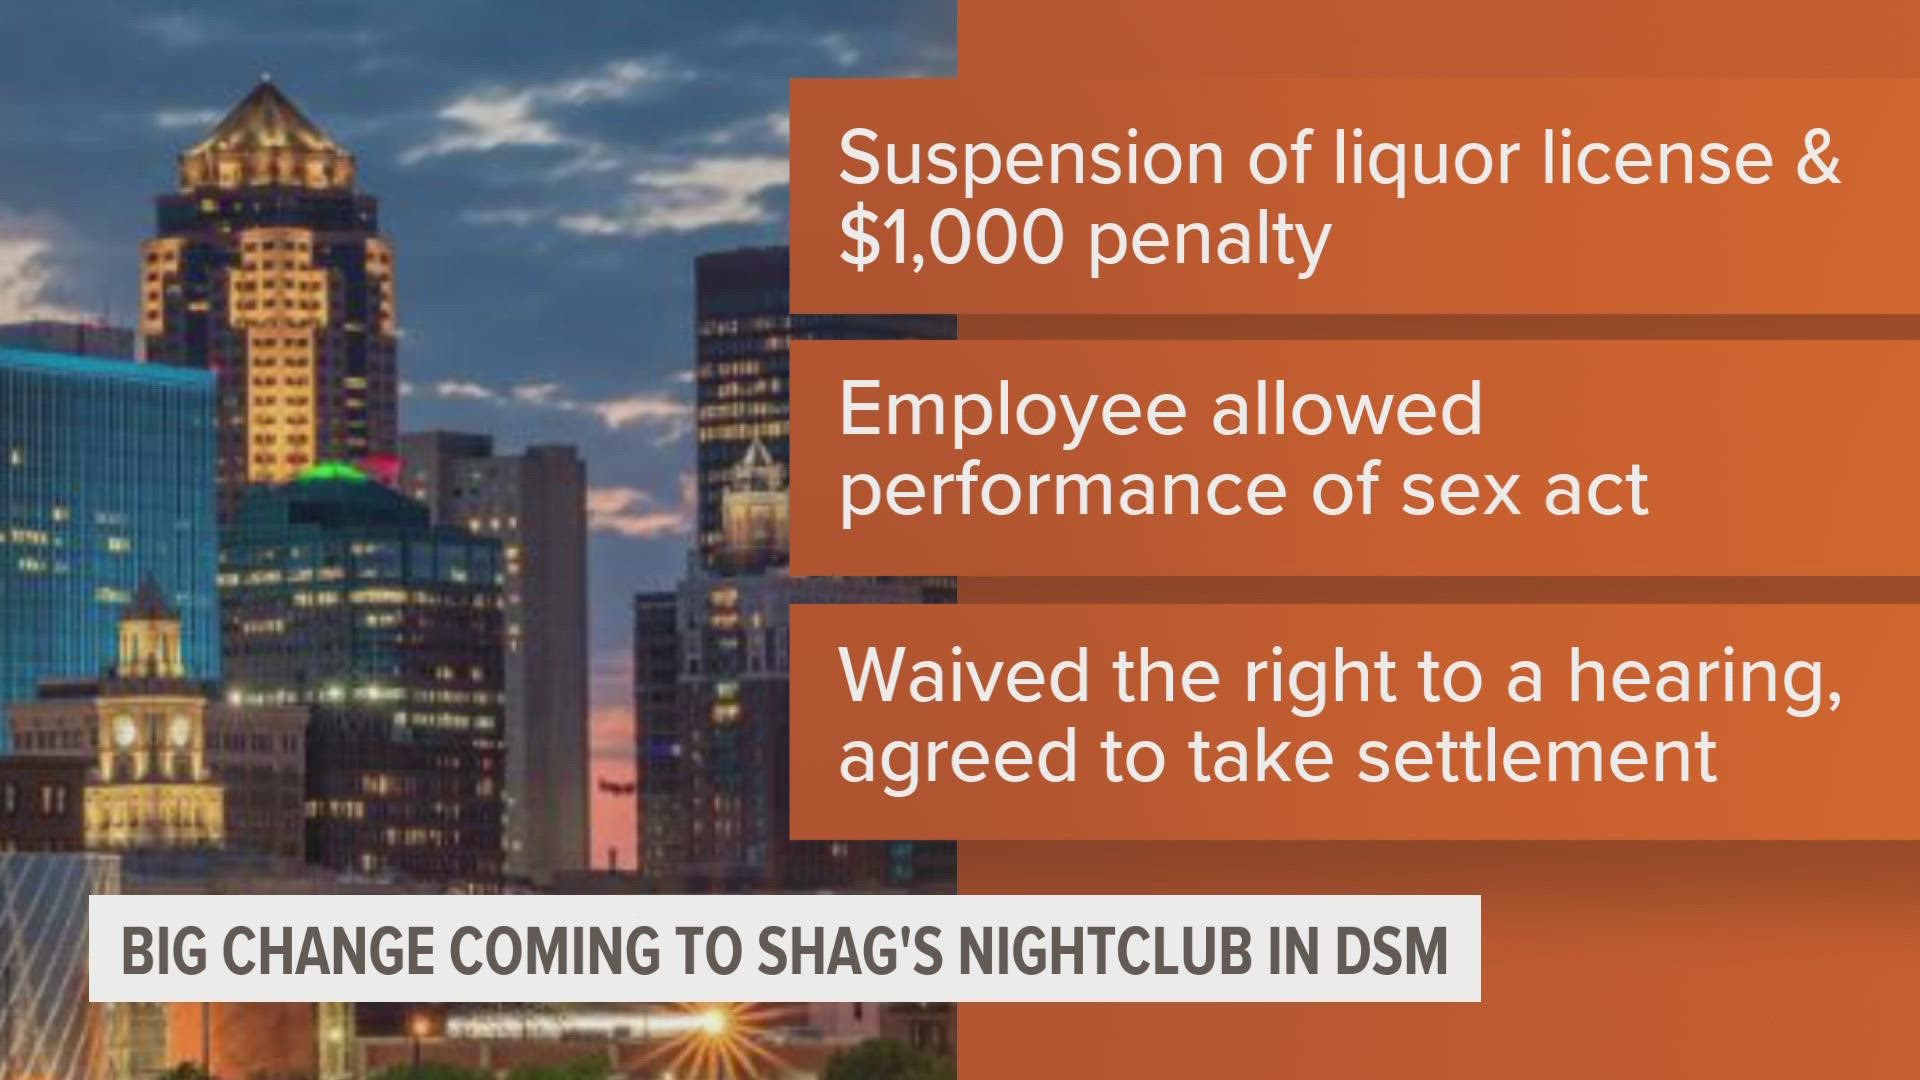 City Council approved a settlement with shag's in downtown Des Moines, including a two-week suspension of their liquor license and $1,000 penalty.